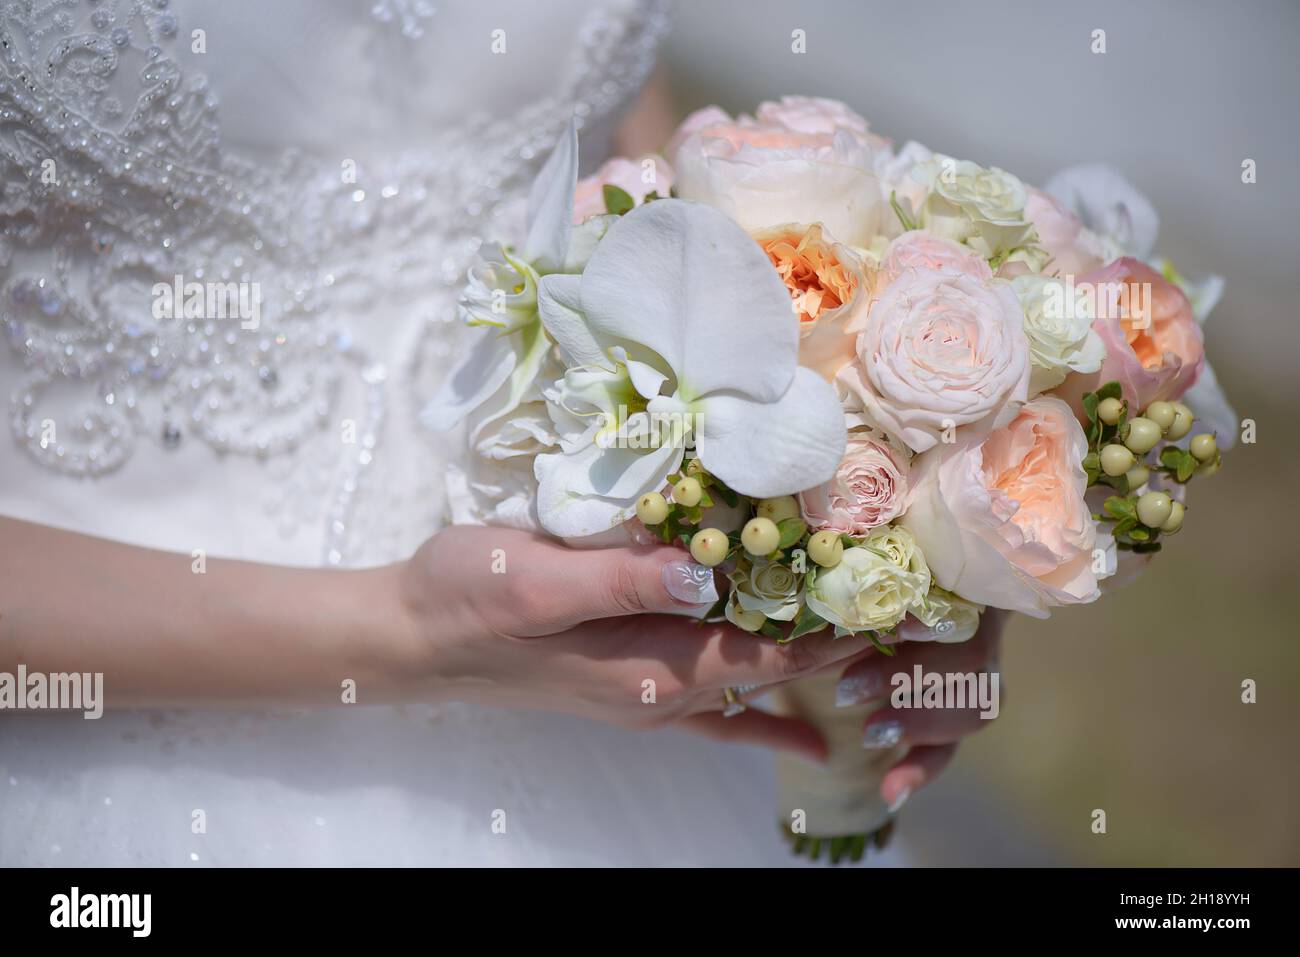 Caucasian bride wearing beautiful embellished dress and holding a round pastel colored bouquet featuring large white orchids, pink roses and berries Stock Photo